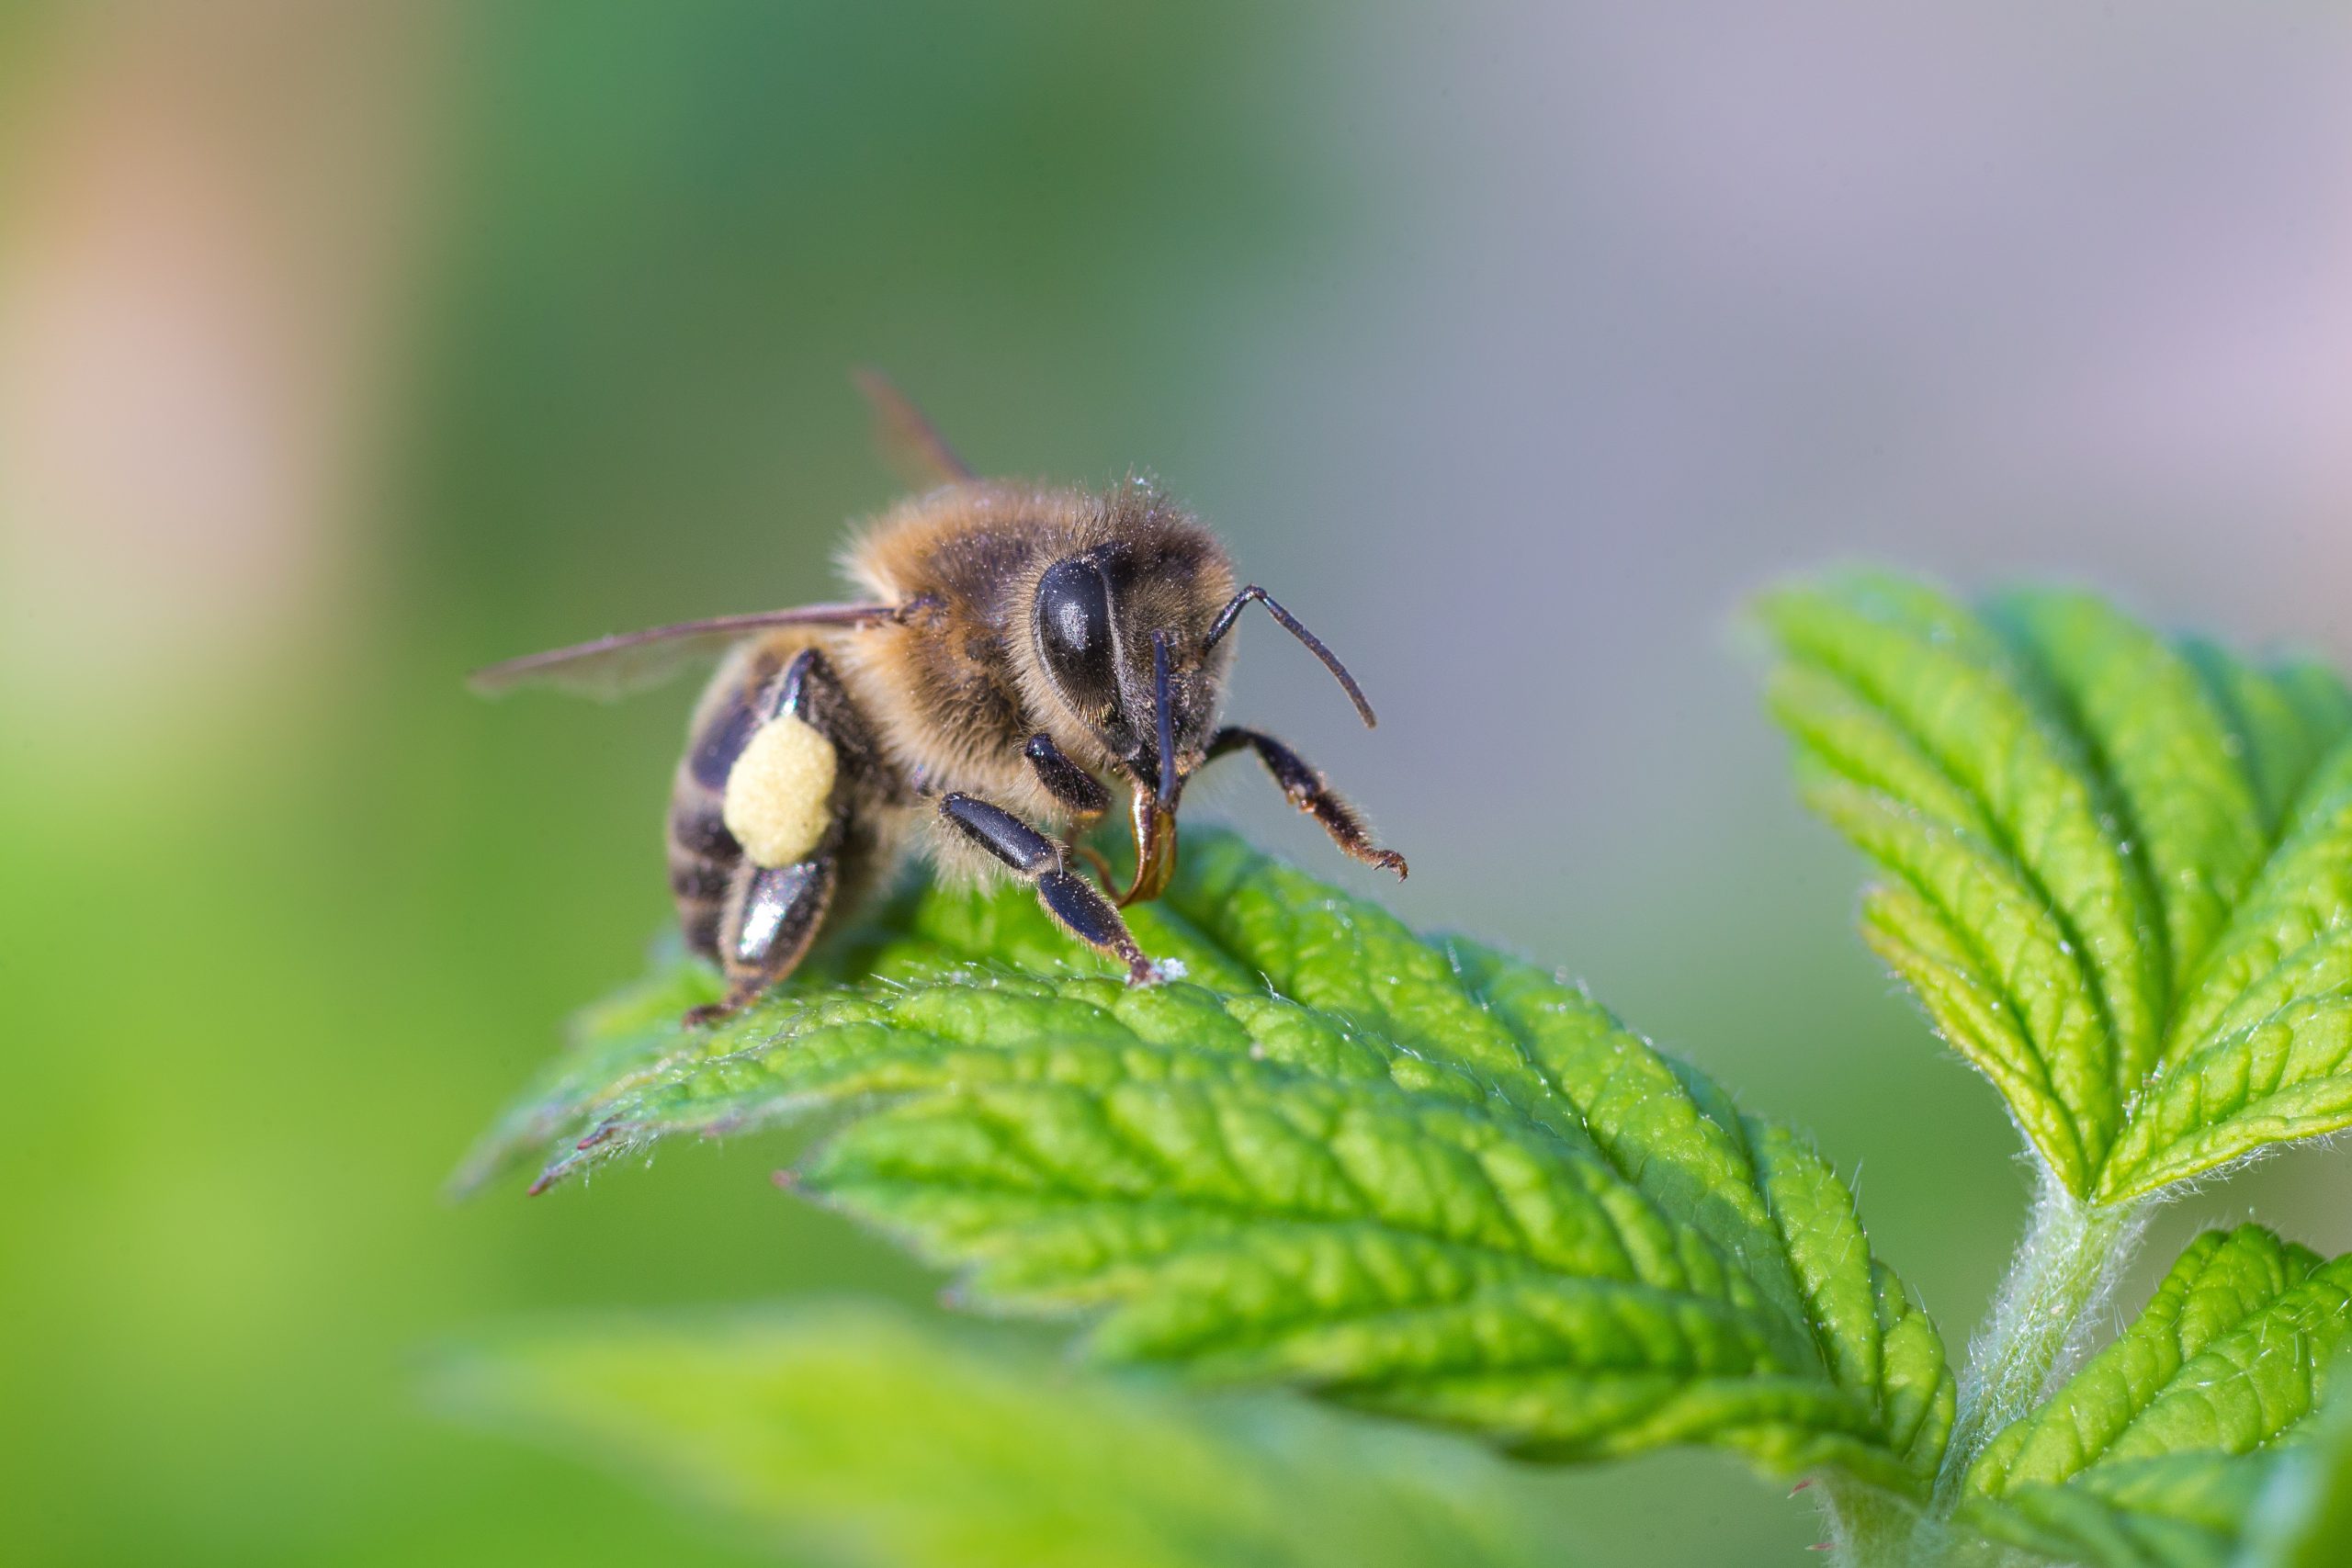 Pesticide Coated Seeds Tested Against Bees